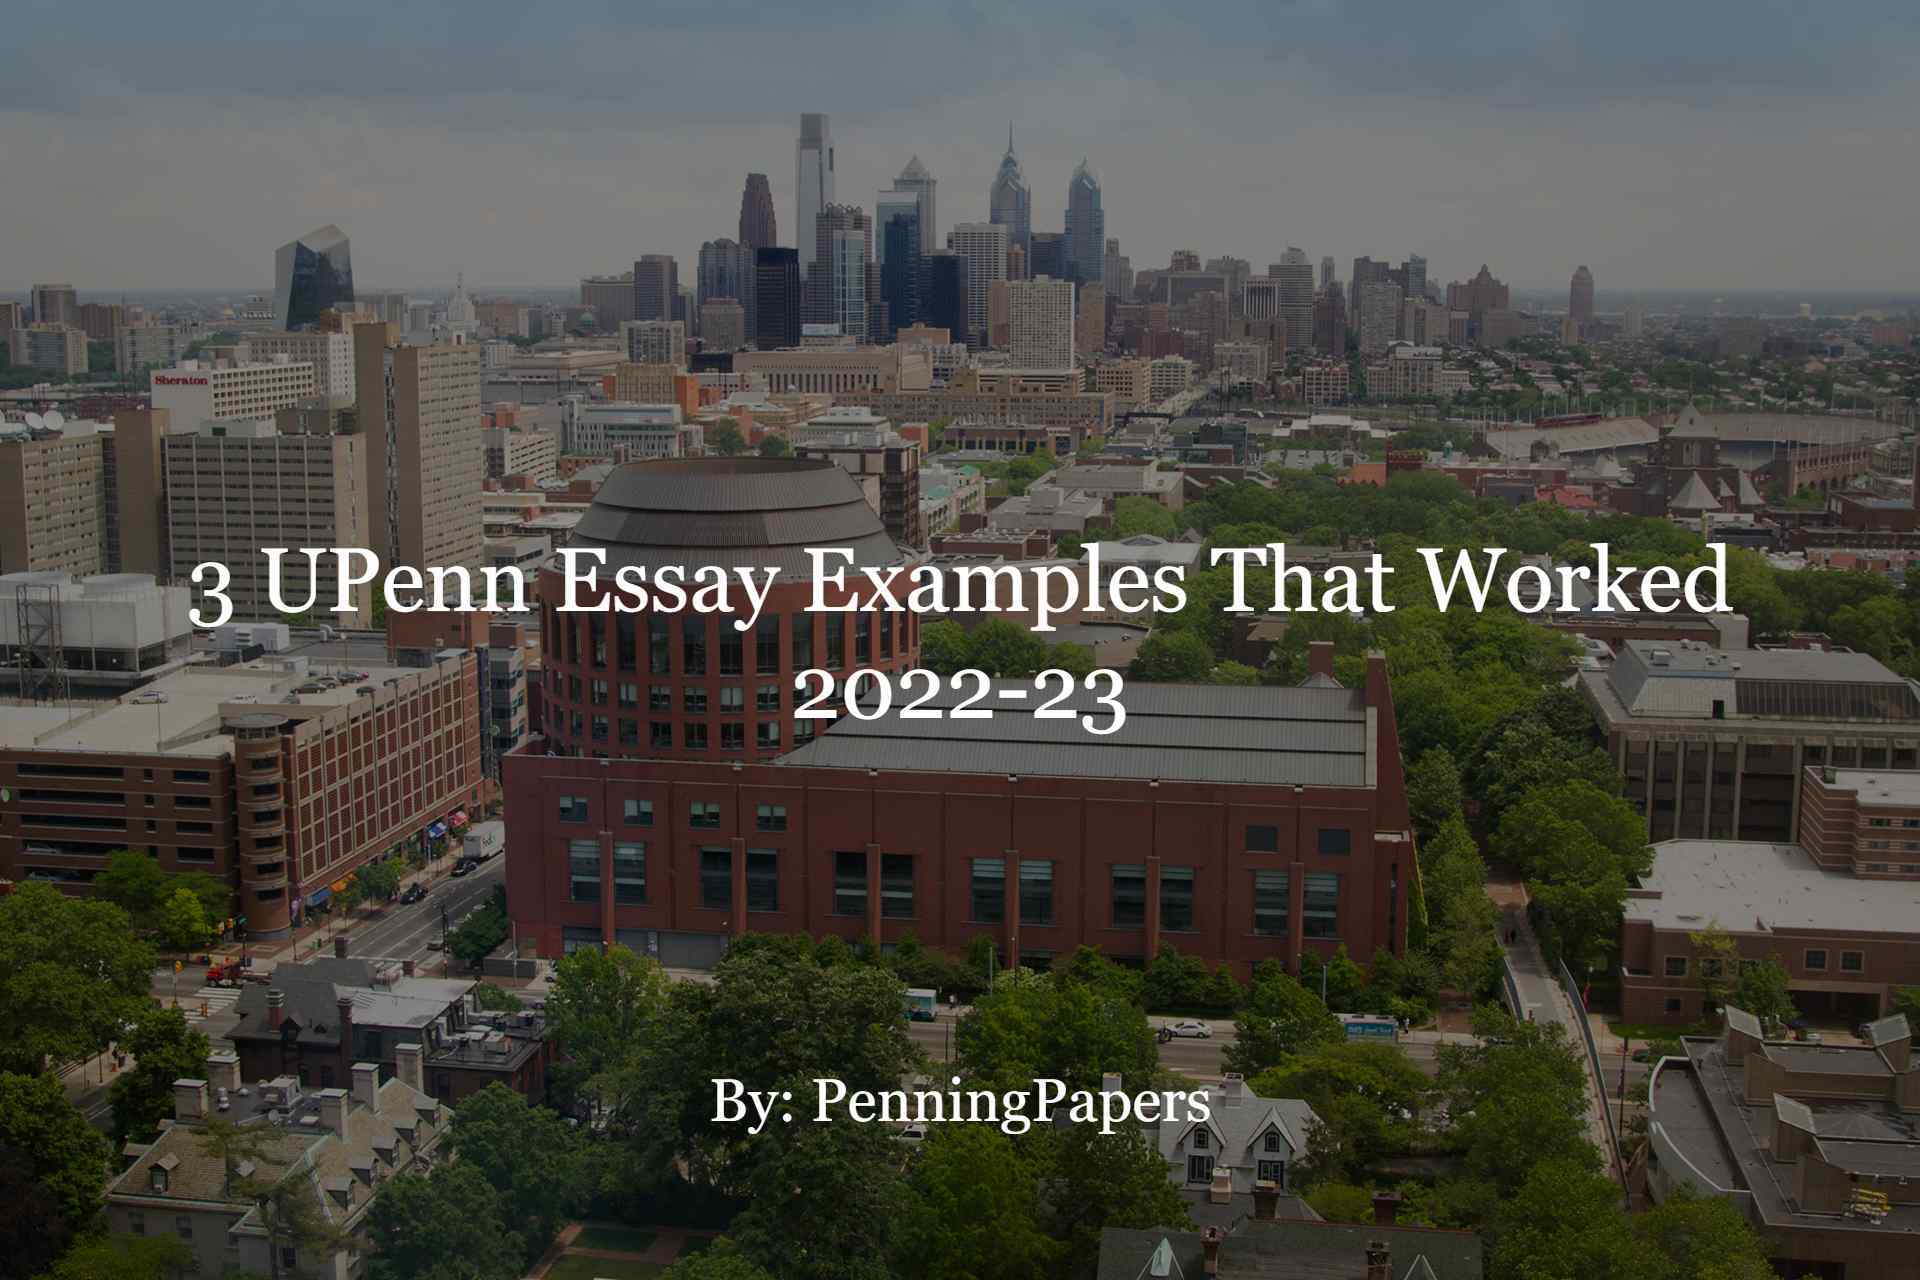 upenn essays that worked